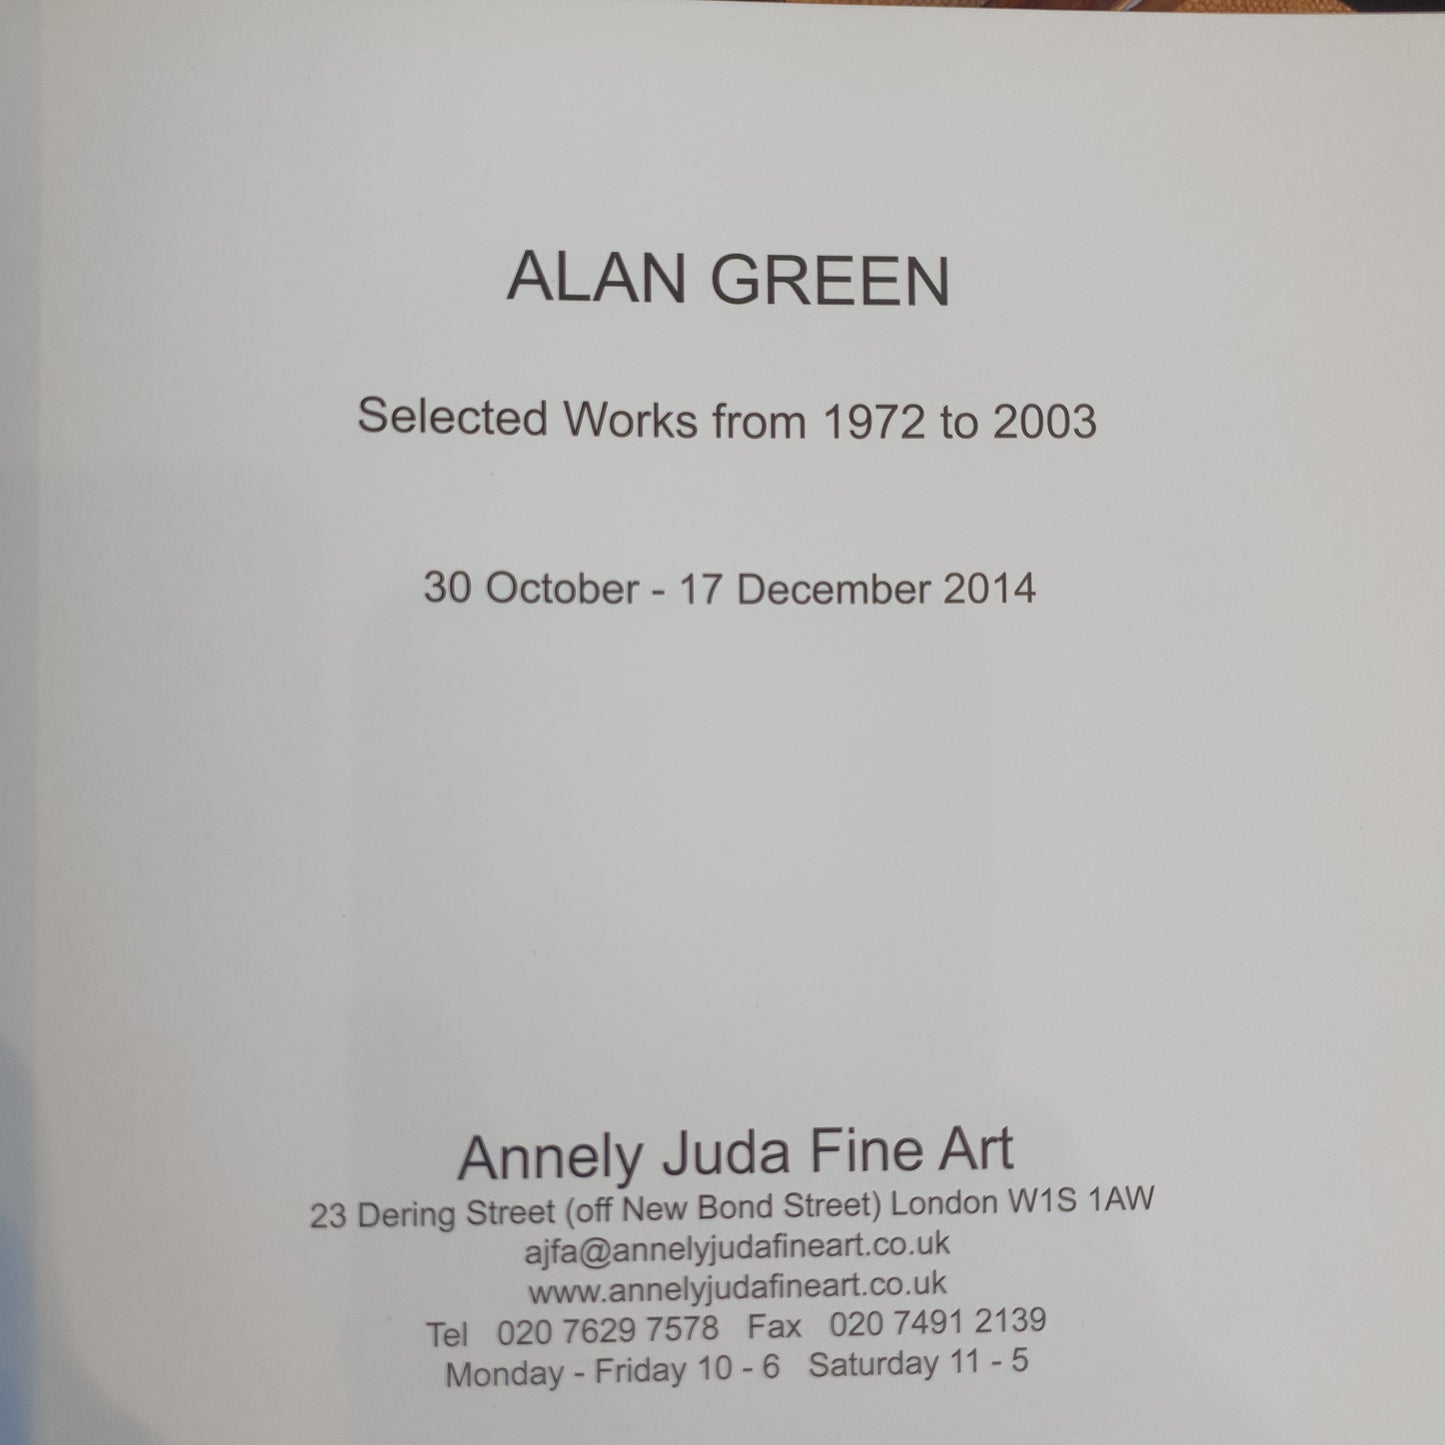 ALAN GREEN. SELECTED WORKS FROM 1972 TO 2003 (ANNELY JUDA FINE ART)